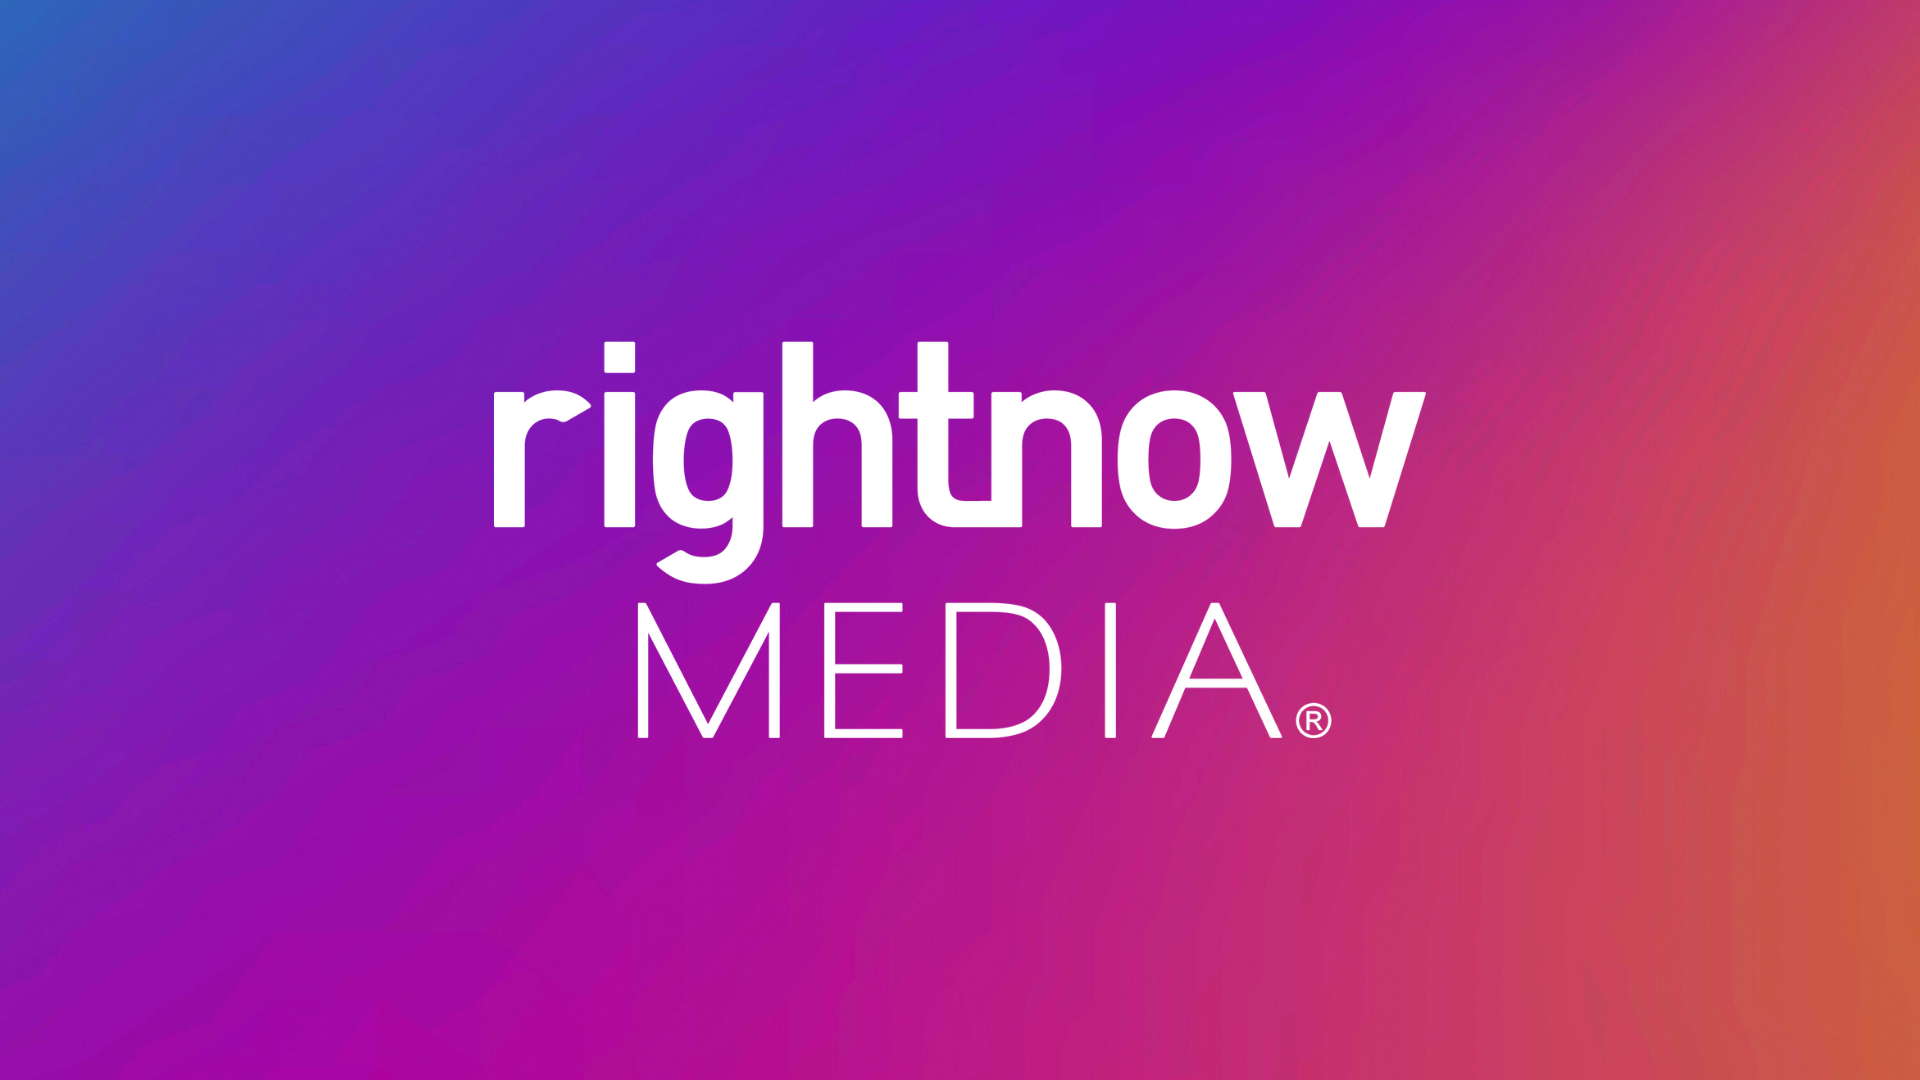 Featured image for rightnow MEDIA